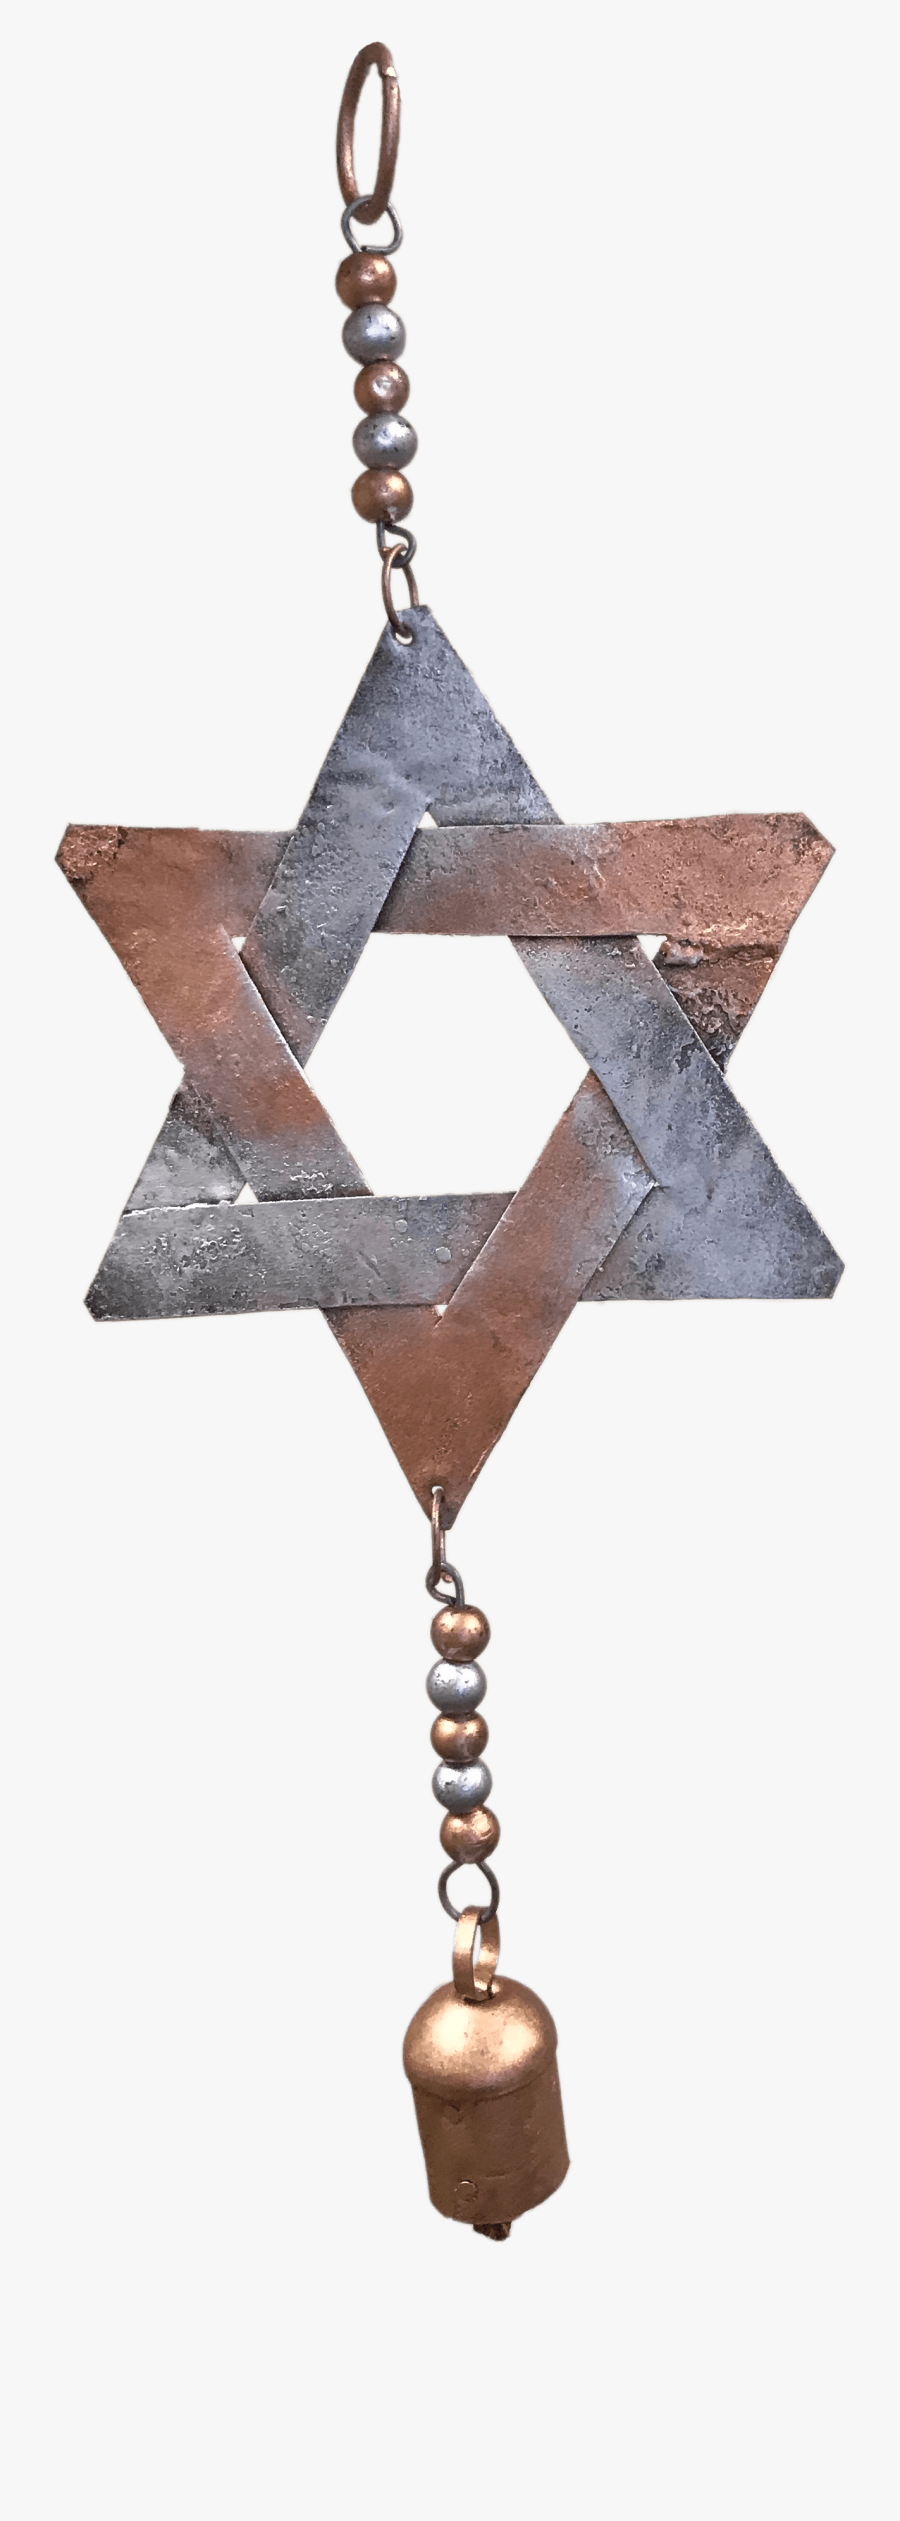 Star Of David Chime Sukkah Decoration From The Sukkah - Triangle, Transparent Clipart